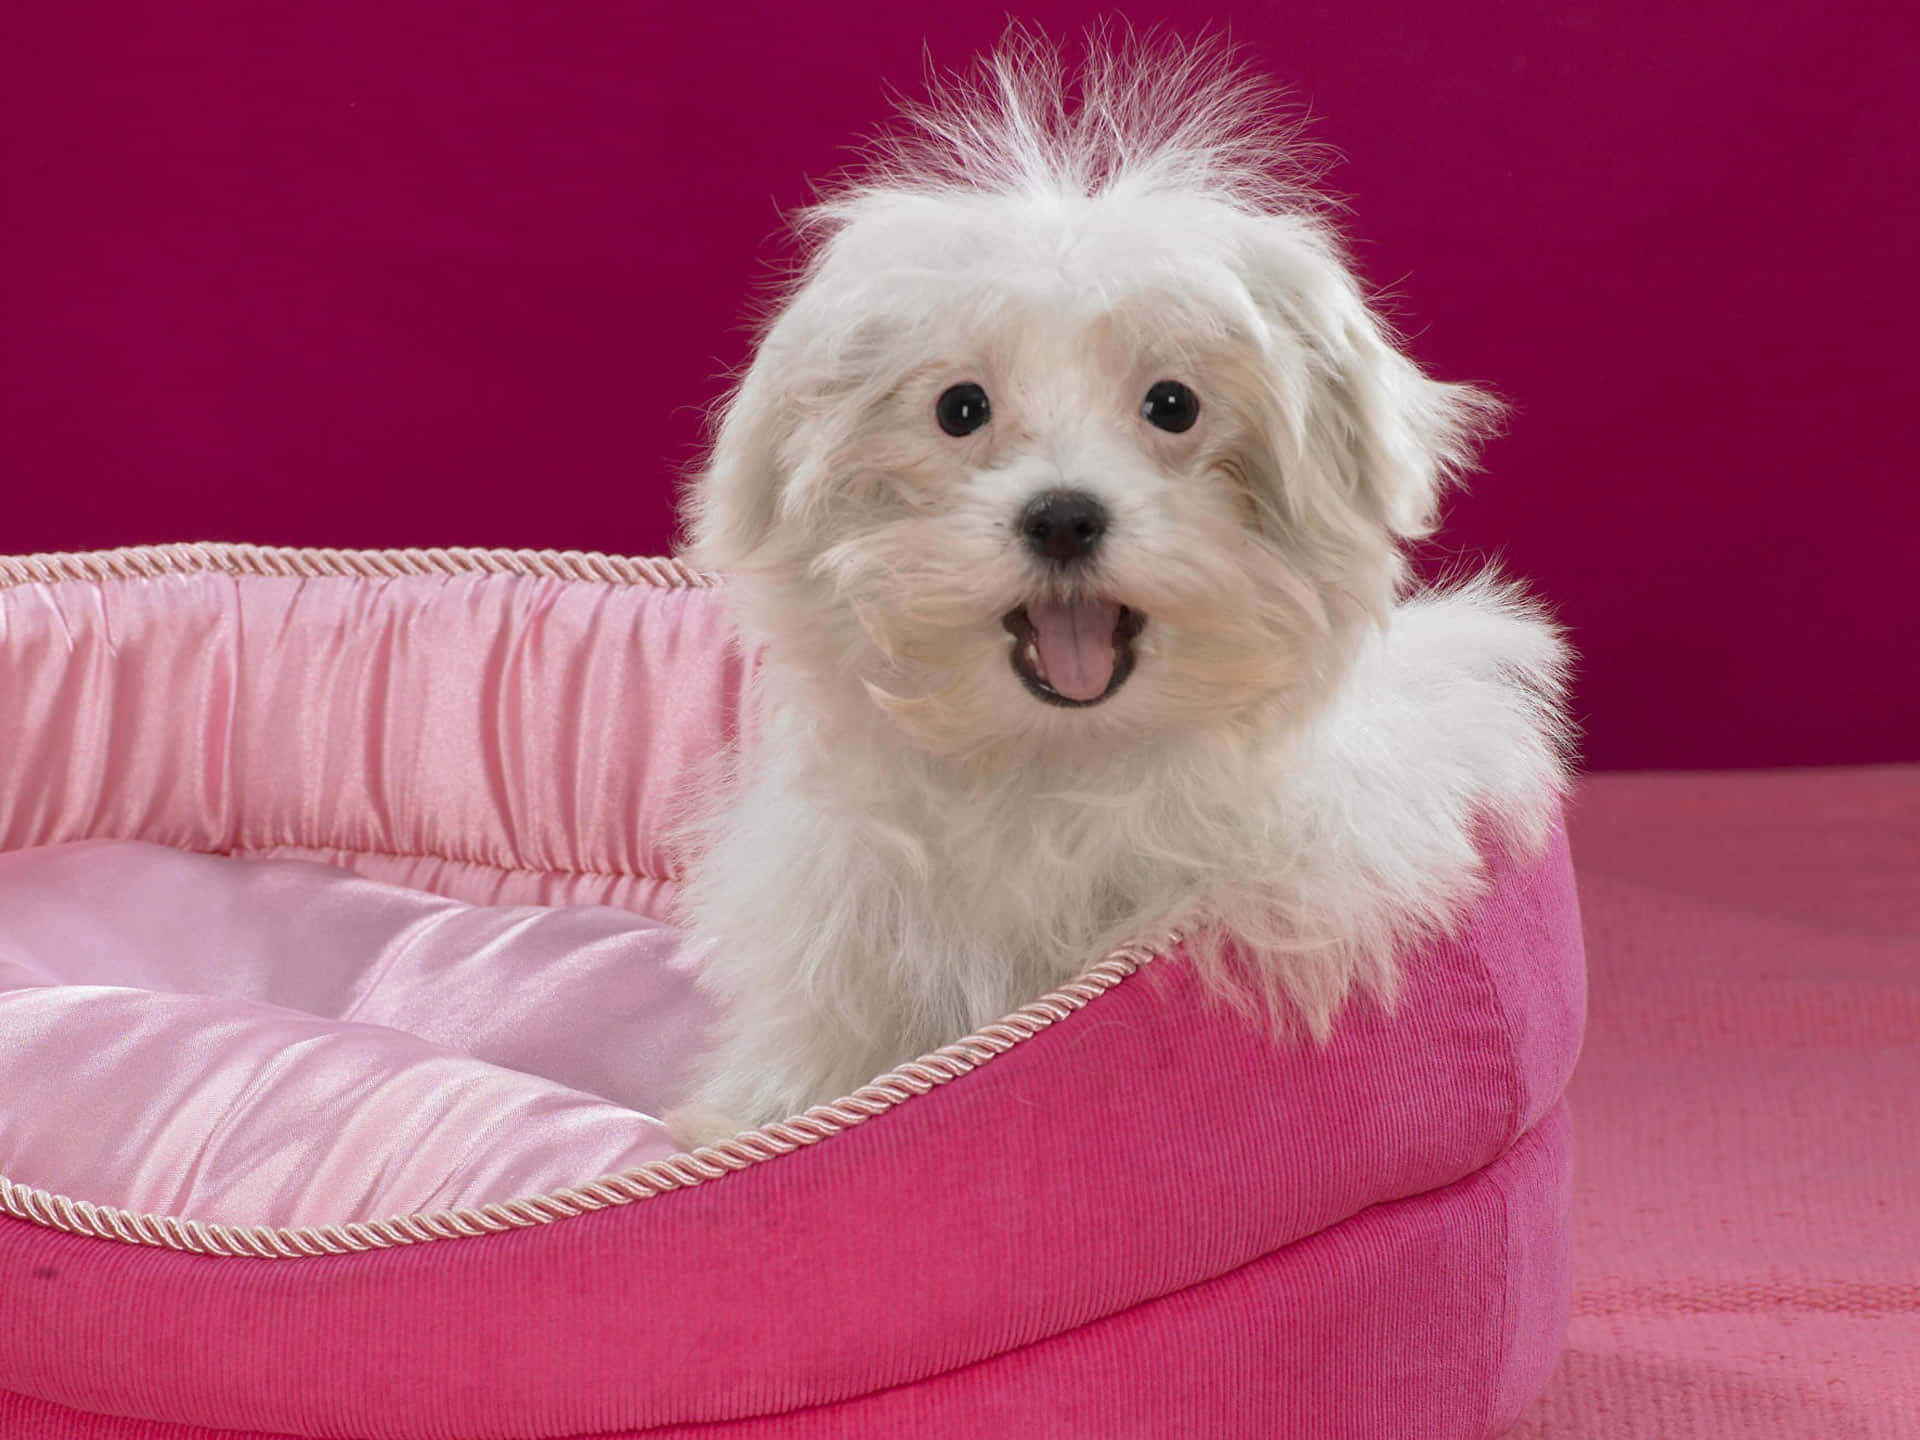 A Small White Dog Sitting In A Pink Dog Bed Wallpaper